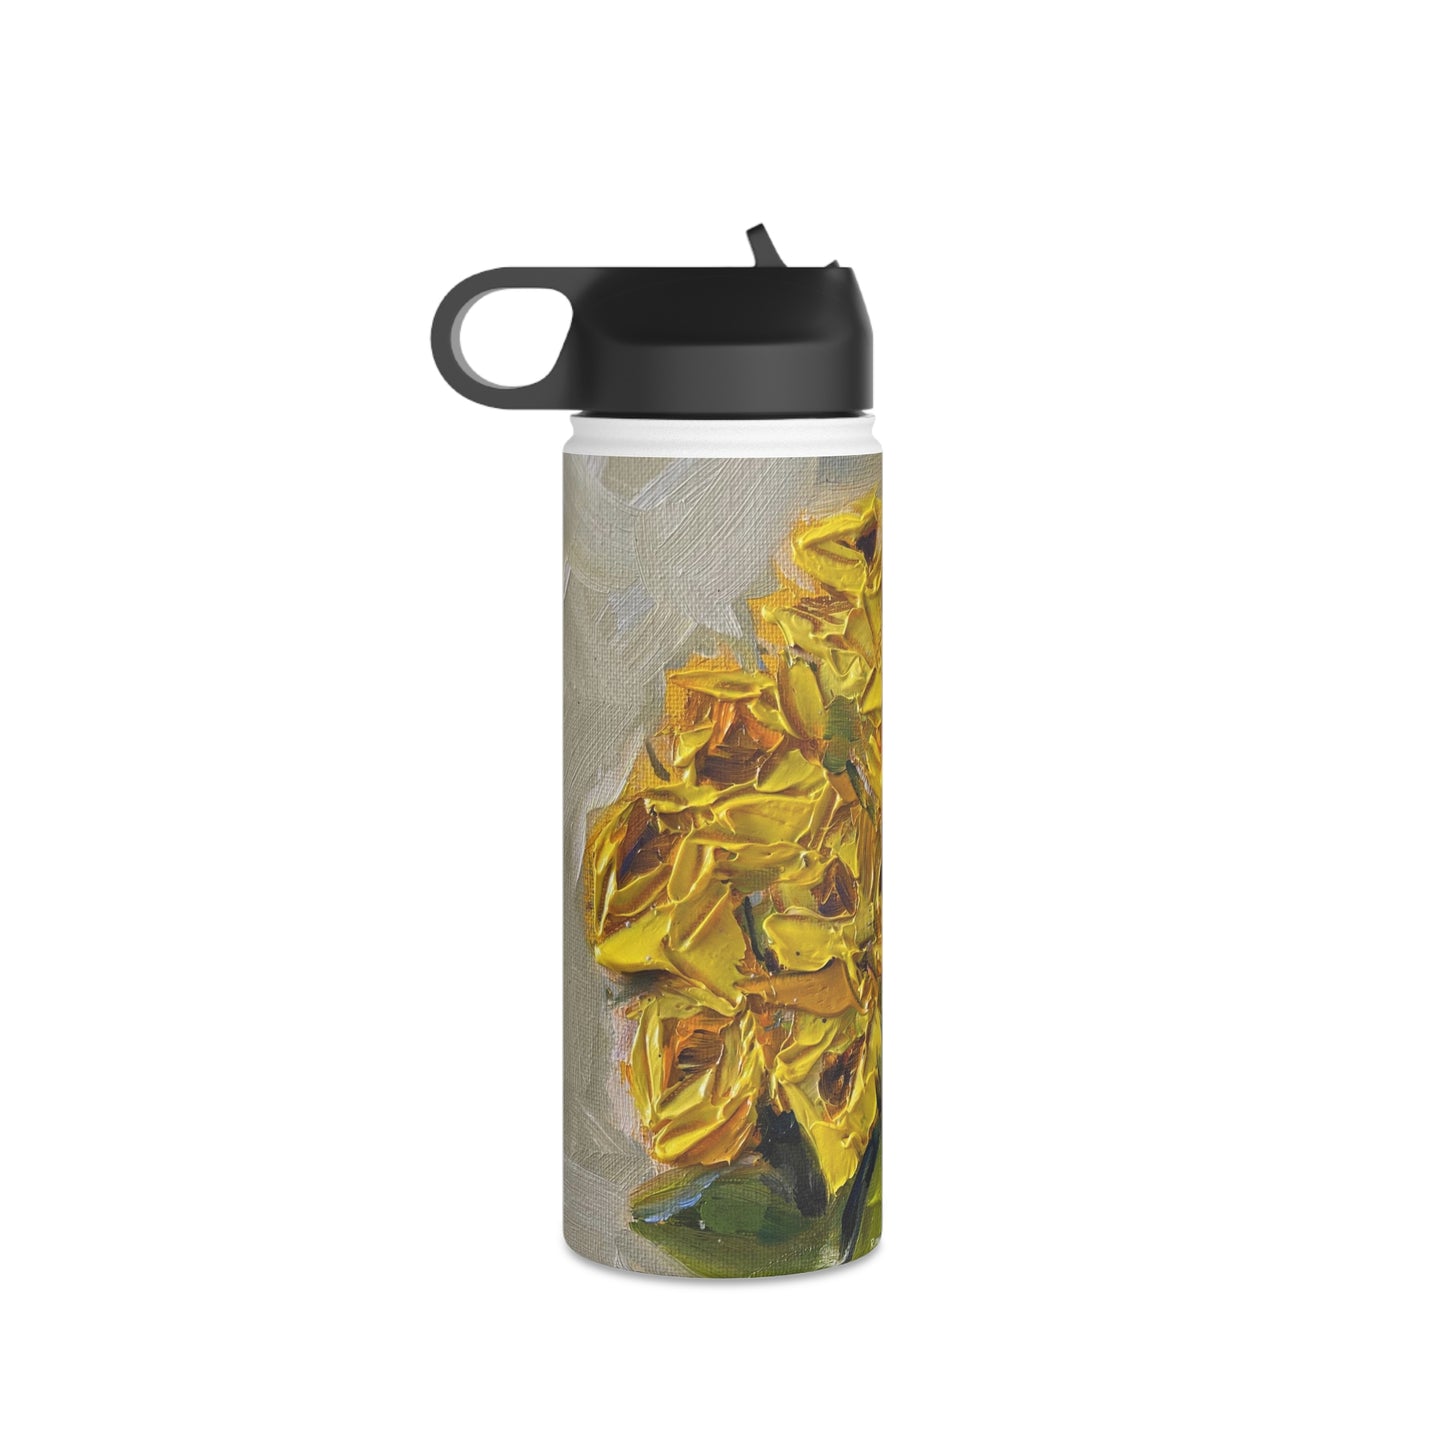 Pink and Yellow Roses (Art) Stainless Steel Water Bottle, Standard Lid